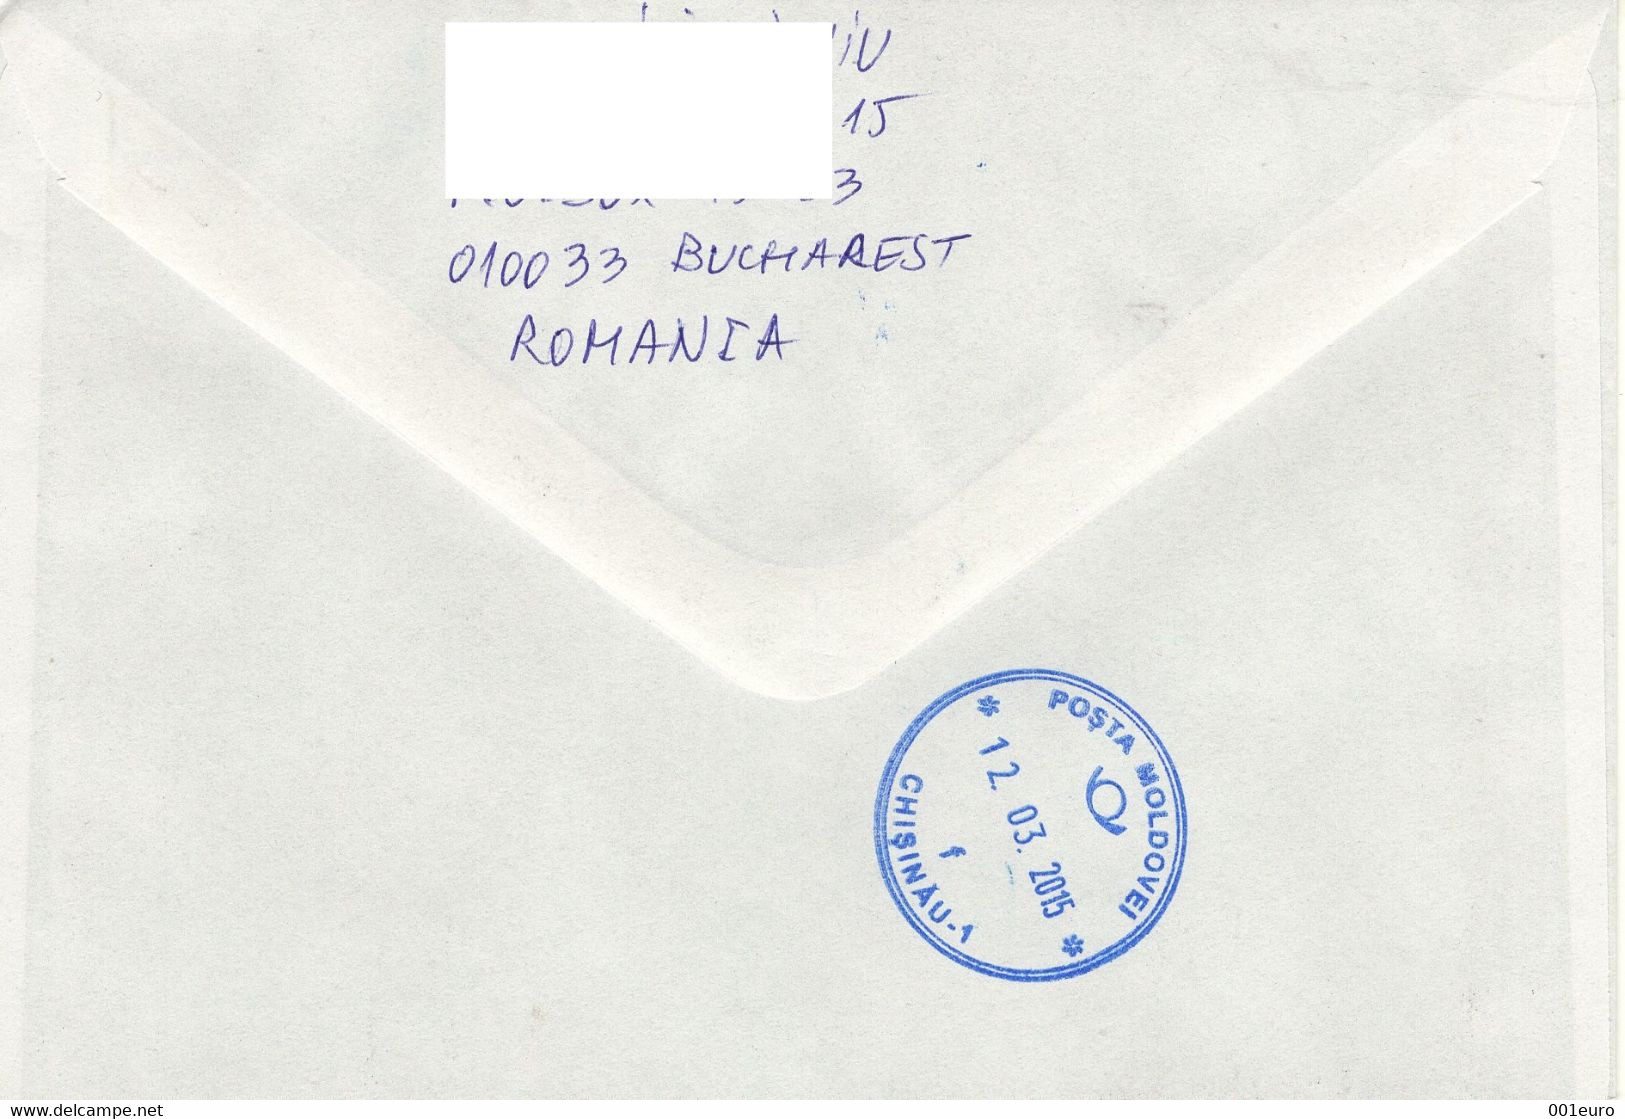 ROMANIA 2010: EUROPA - THE LETTER On REGISTERED Cover Circulated To Moldova Republic - Registered Shipping! - Brieven En Documenten